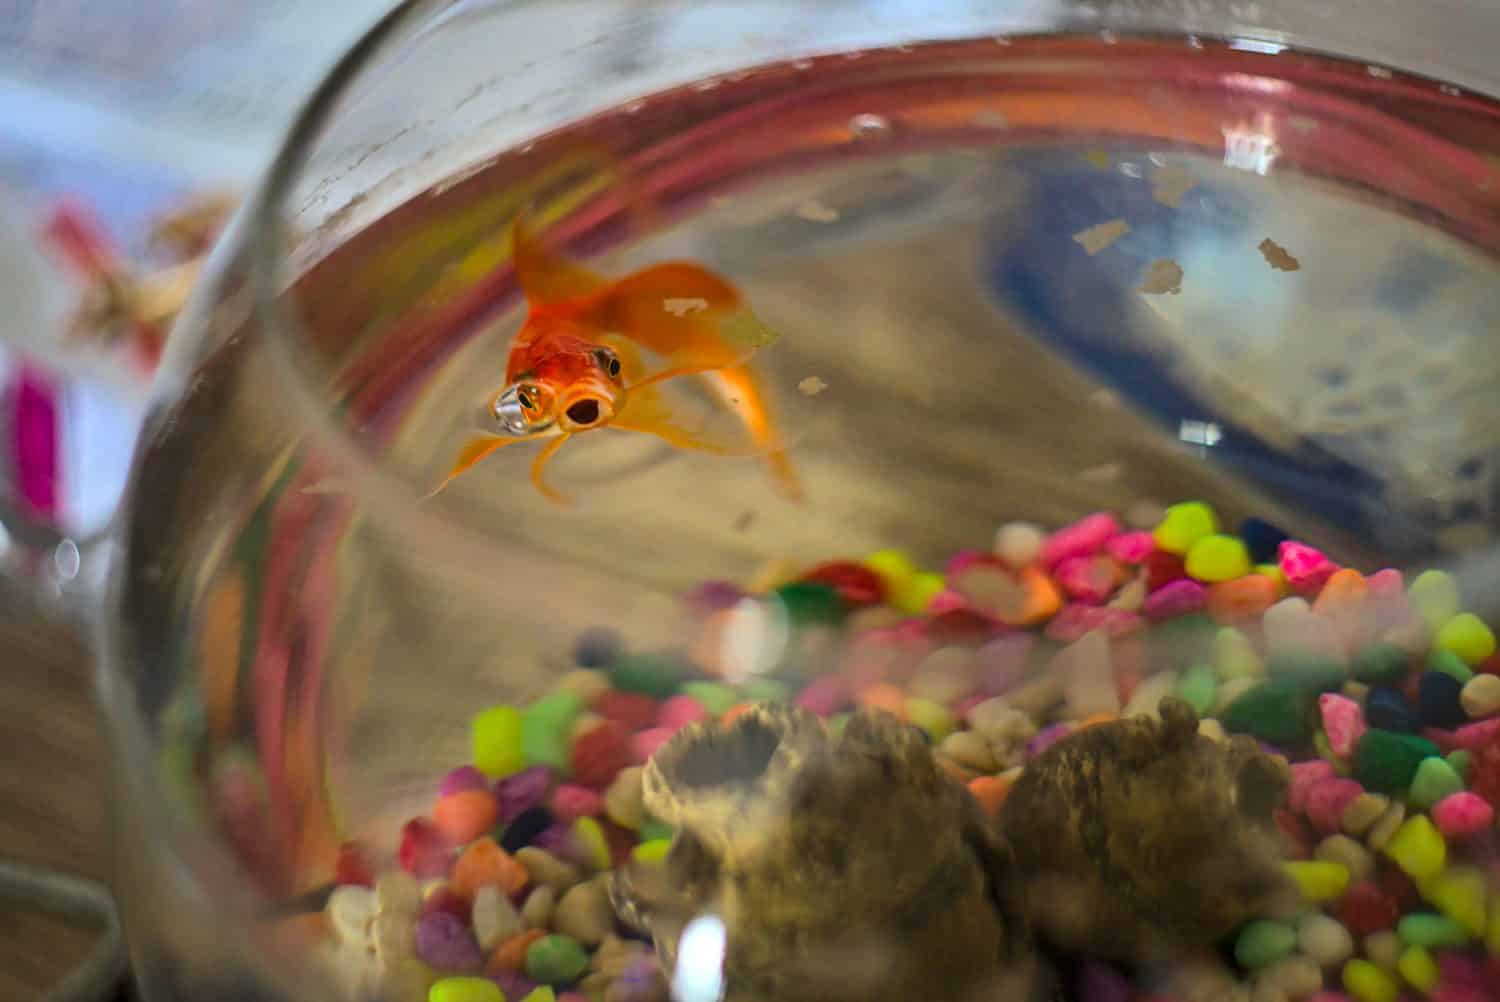 Goldfish swimming in glass bowl with colorful pebbles, opens mouth while eating. Fish food floats on water surface.